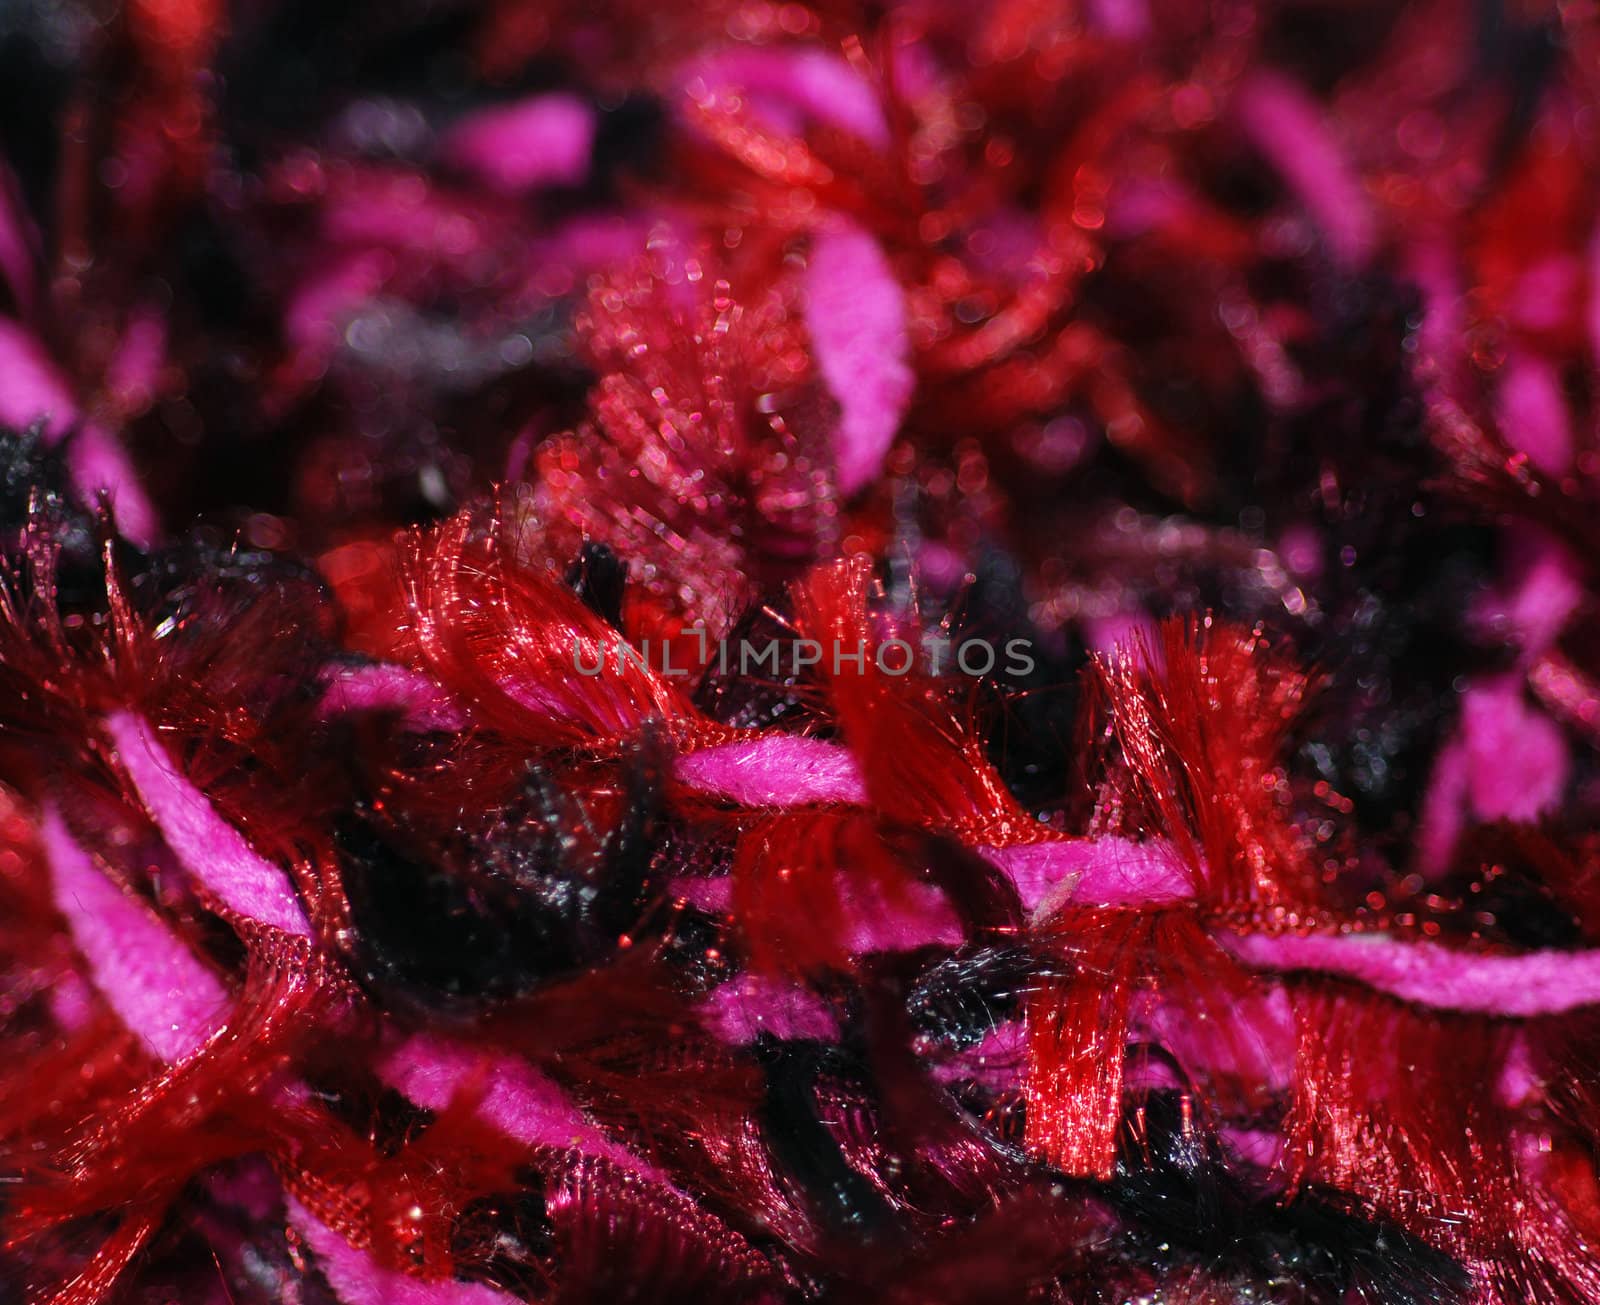 Red and Pink Fibers Close Up by pwillitts